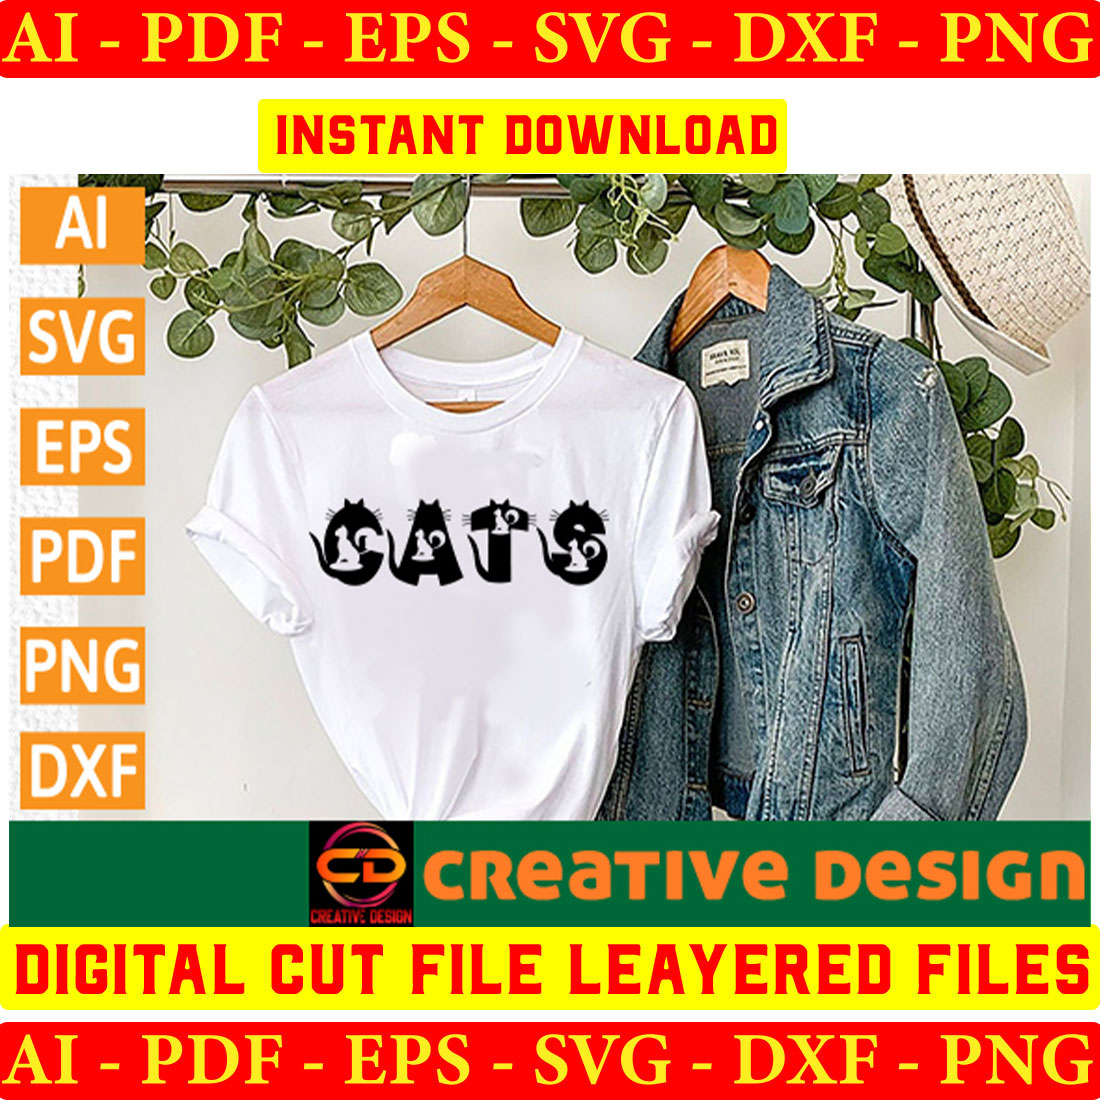 T - shirt with the word cats on it next to a pair of jeans.